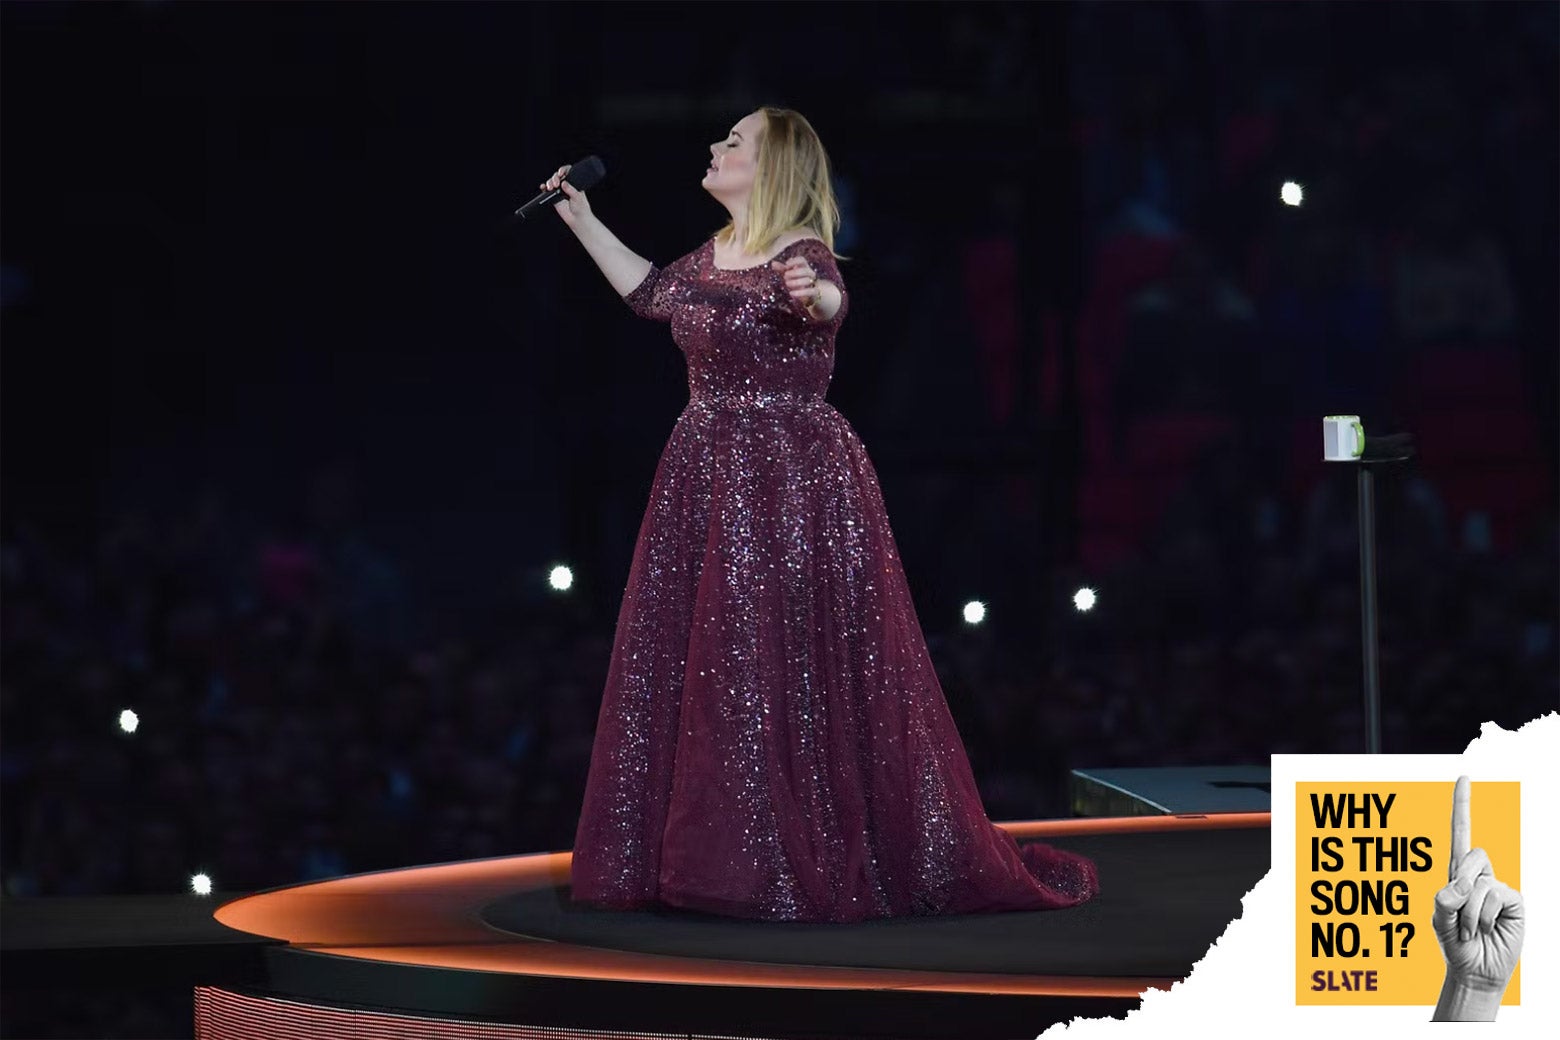 Adele sings on stage in front of a capacity crowd.